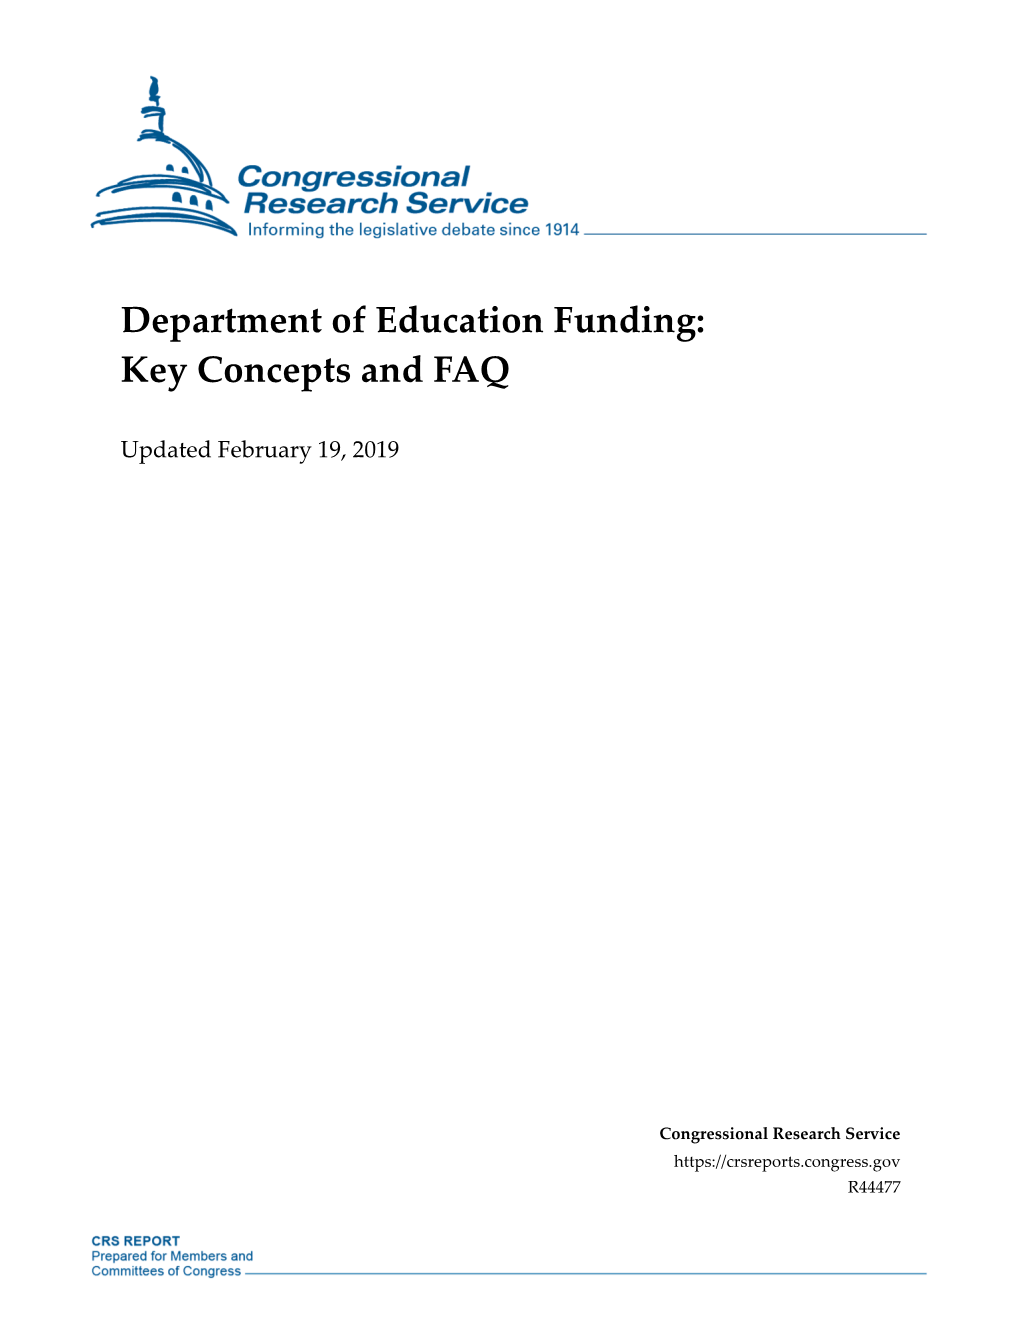 Department of Education Funding: Key Concepts and FAQ